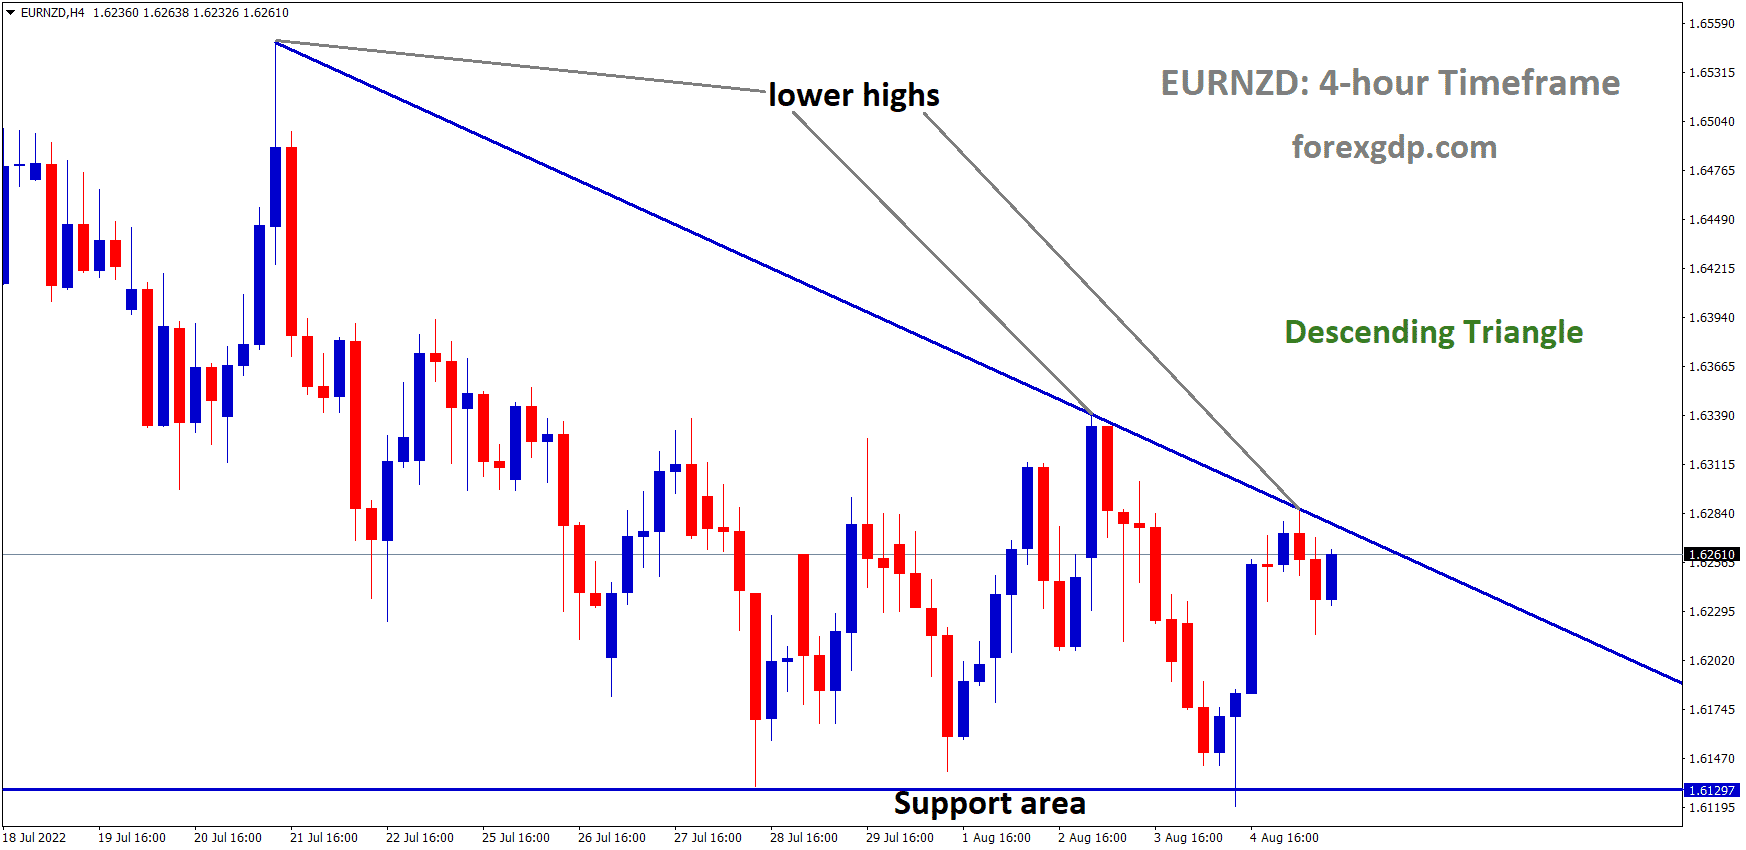 EURNZD is moving in the Descending triangle pattern and the market has fallen from the Lower high area of the channel